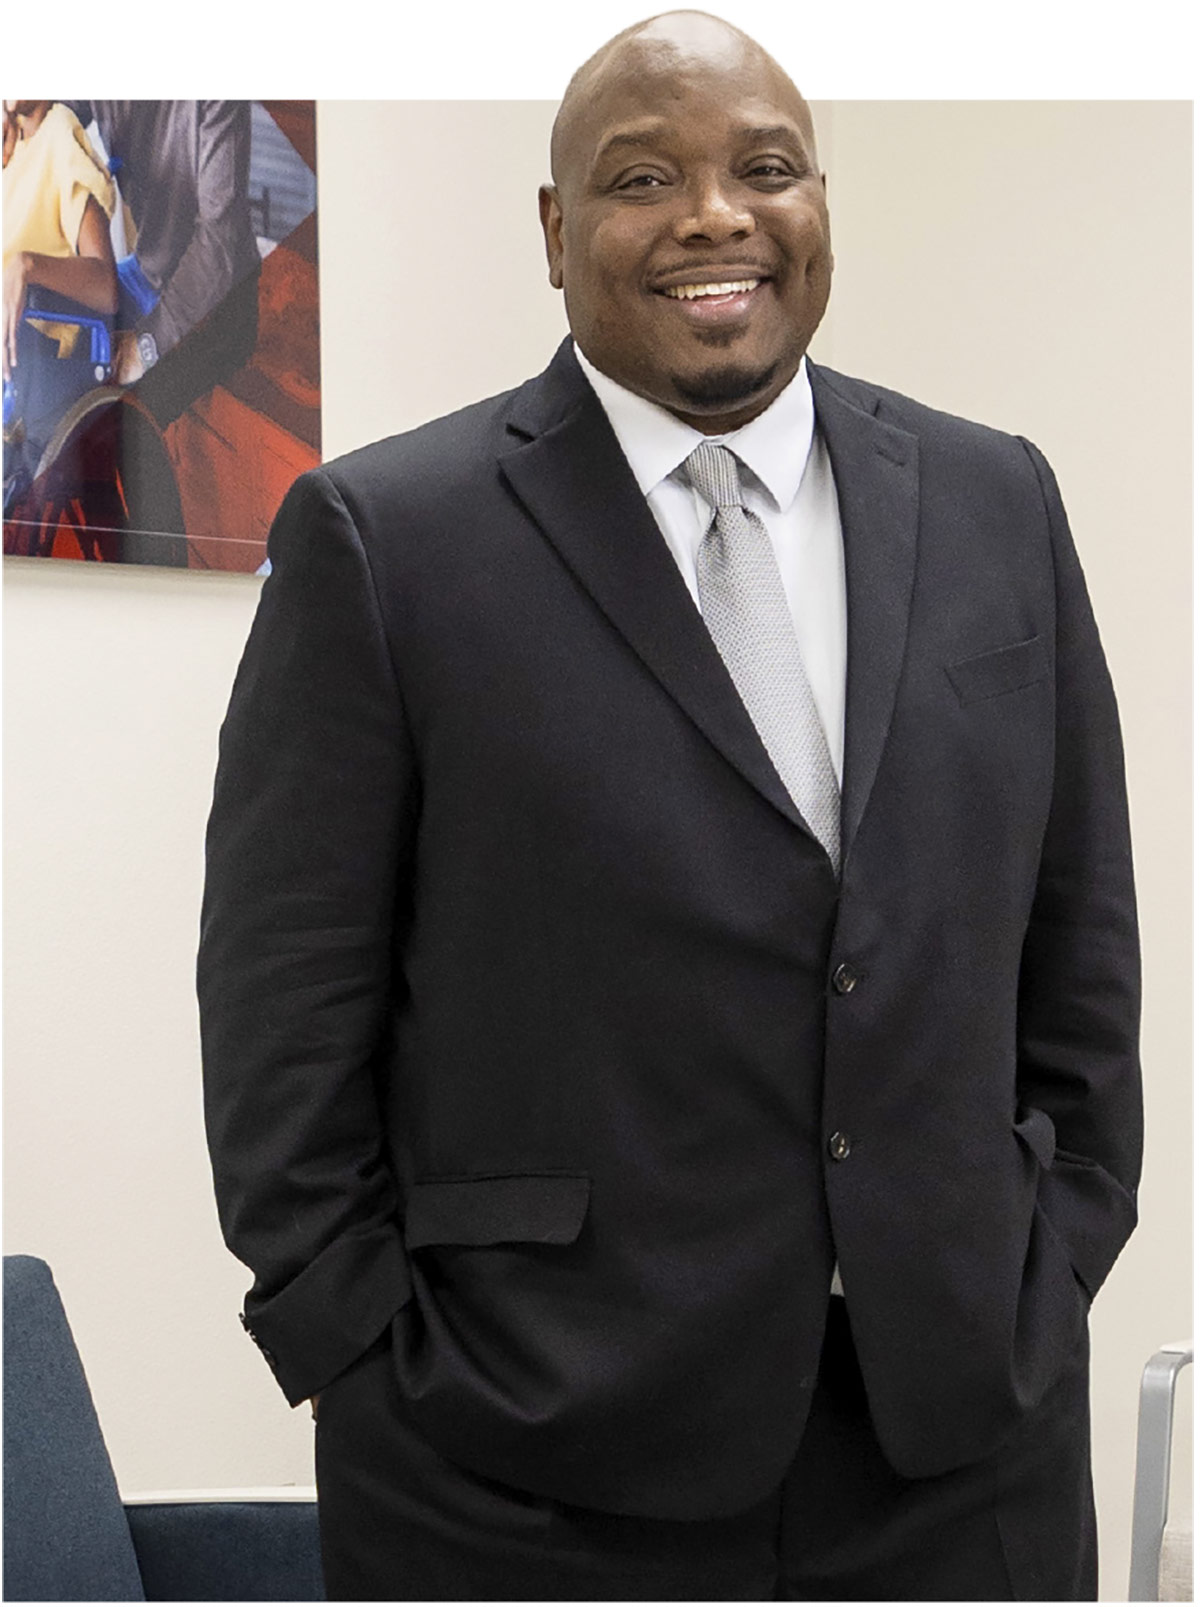 A portrait photograph of Chris Townsend (PhD, LPC, AADC – Your Life Behavorial Health and Wellness Clinic director) smiling in a black suit and white button-up dress shirt underneath with light grey tie as he poses with his arms placed inside the front pockets of his black dress pants